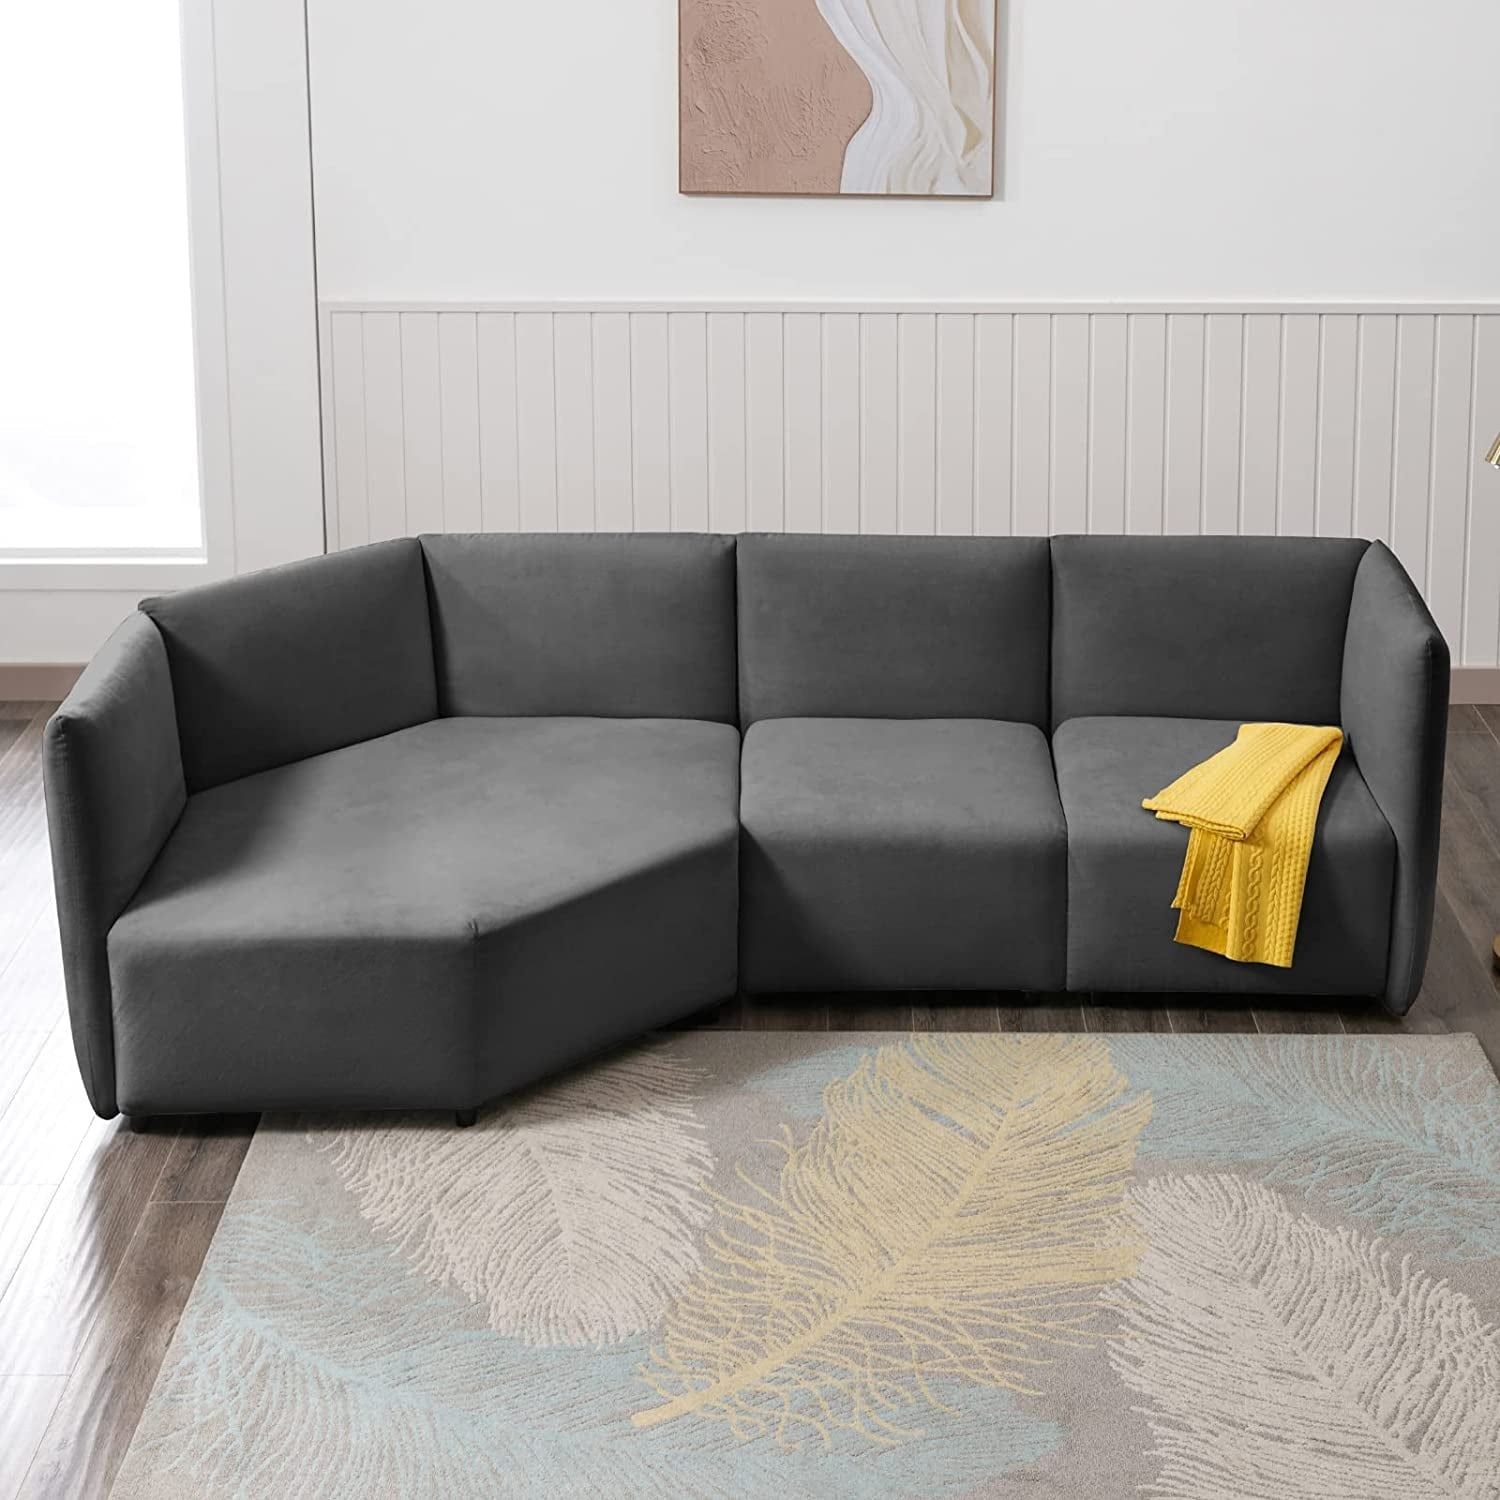 Mixoy Curved Sectional Sofa Couch With Adjustable Armrest And Backrest,   (View 16 of 20)